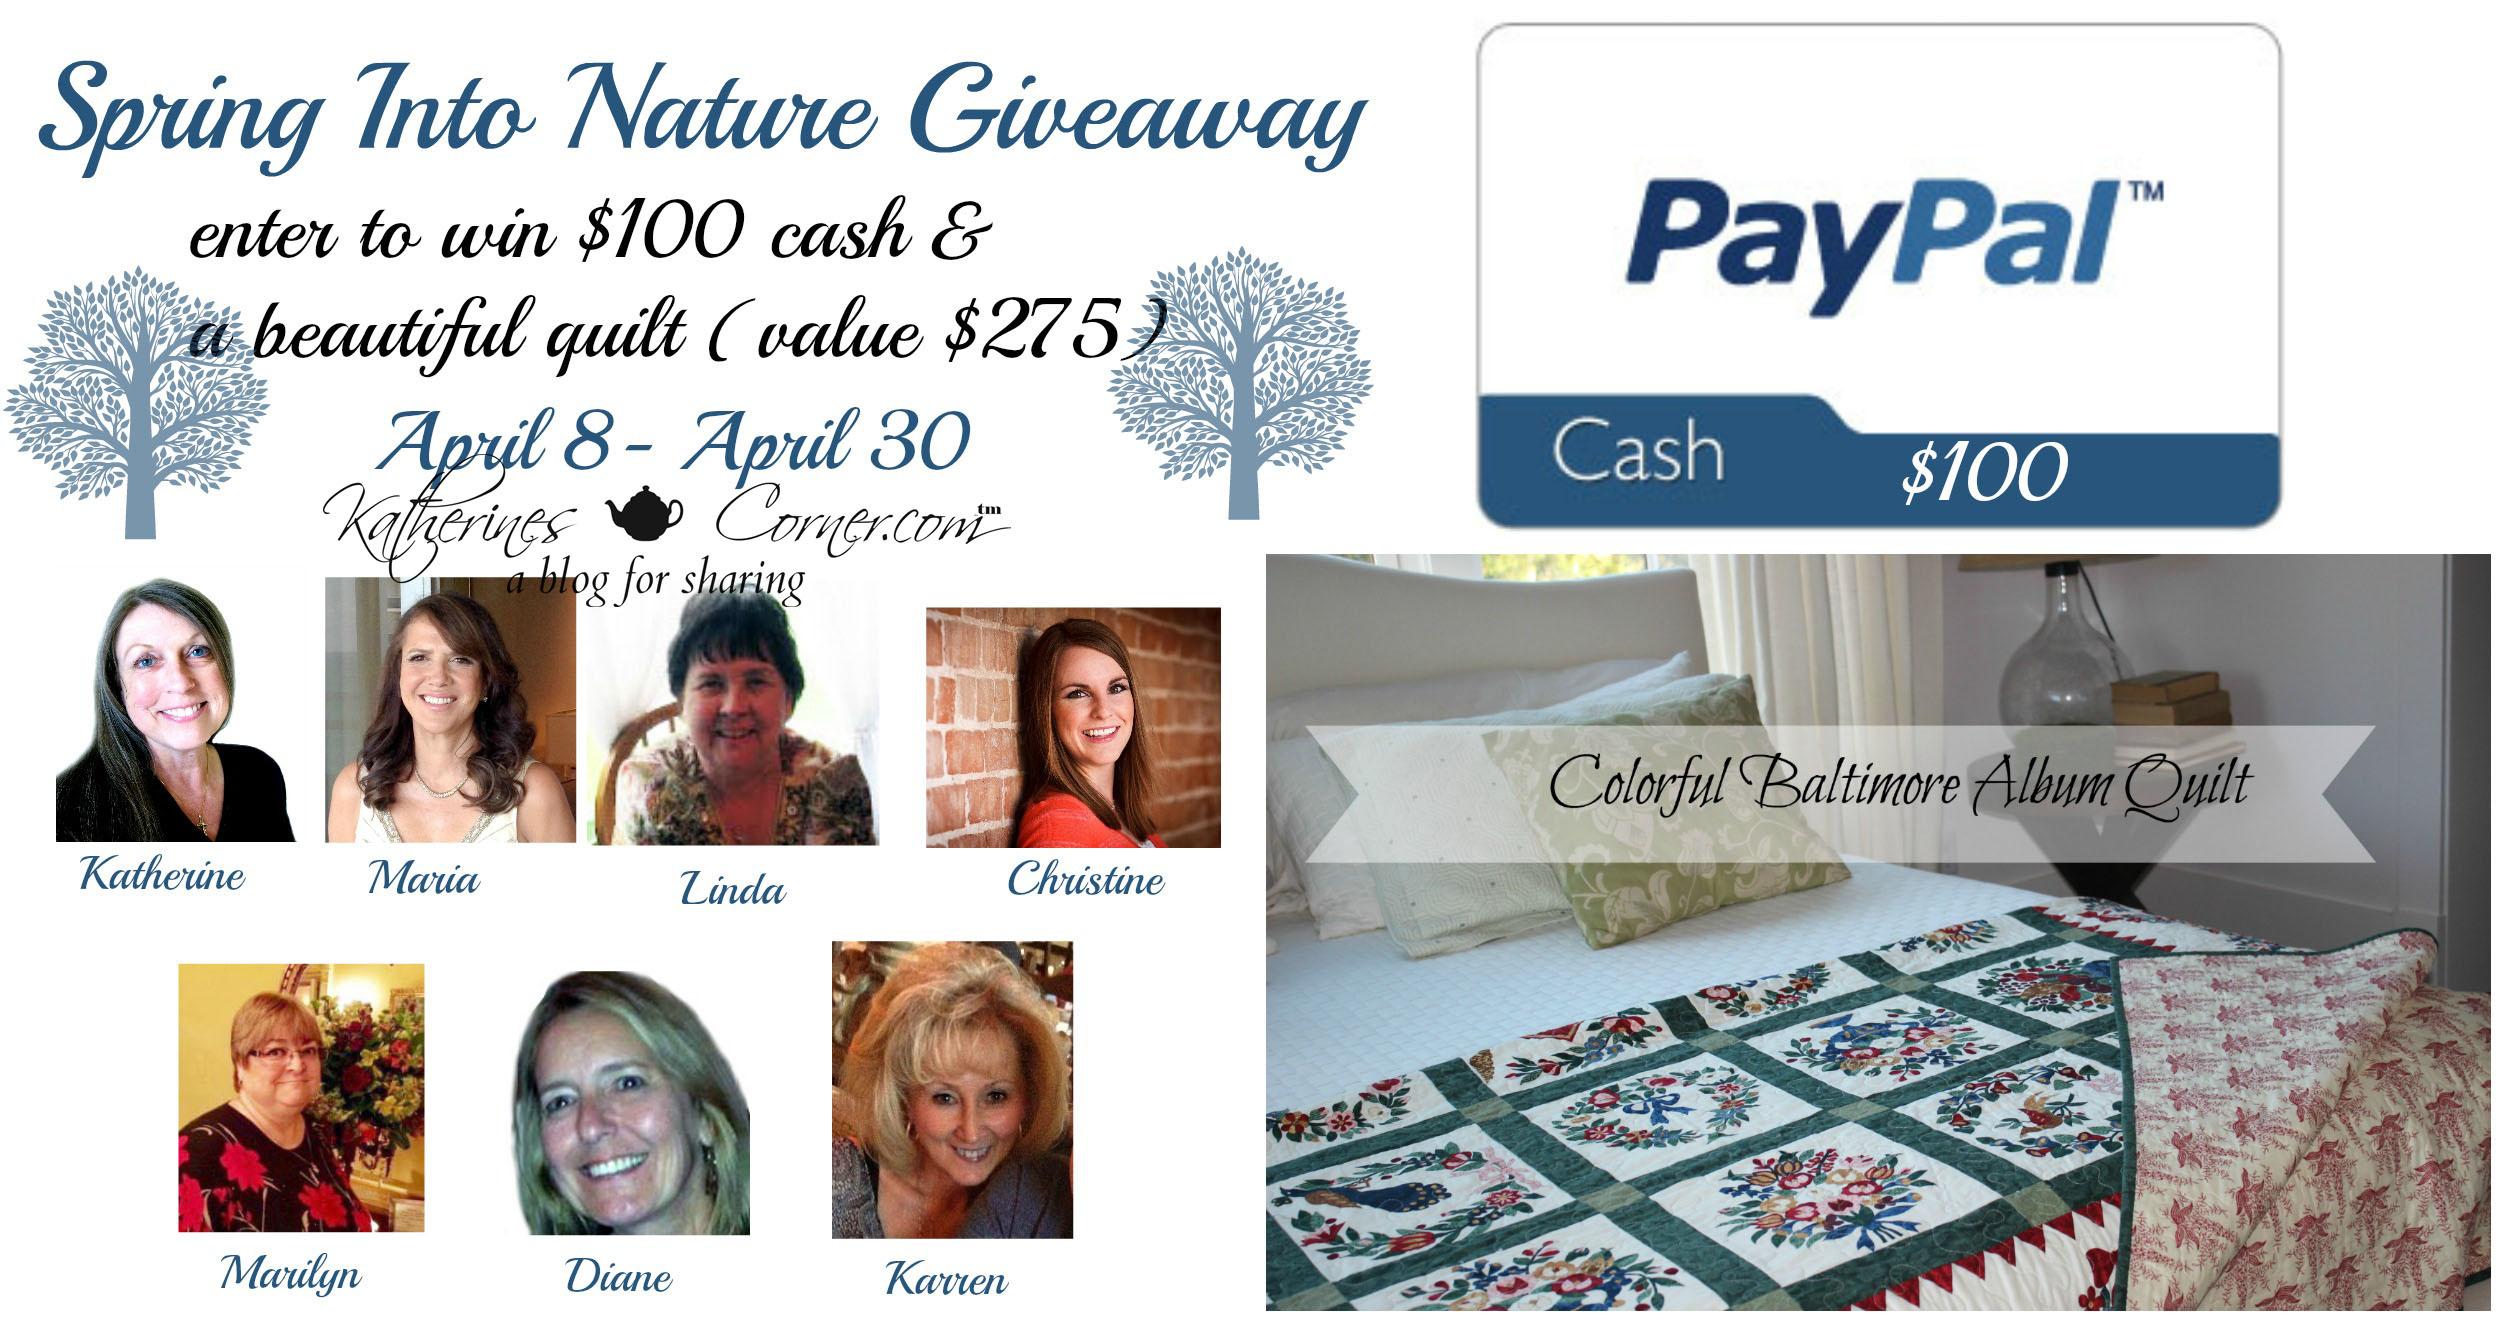 Spring Into Nature Giveaway